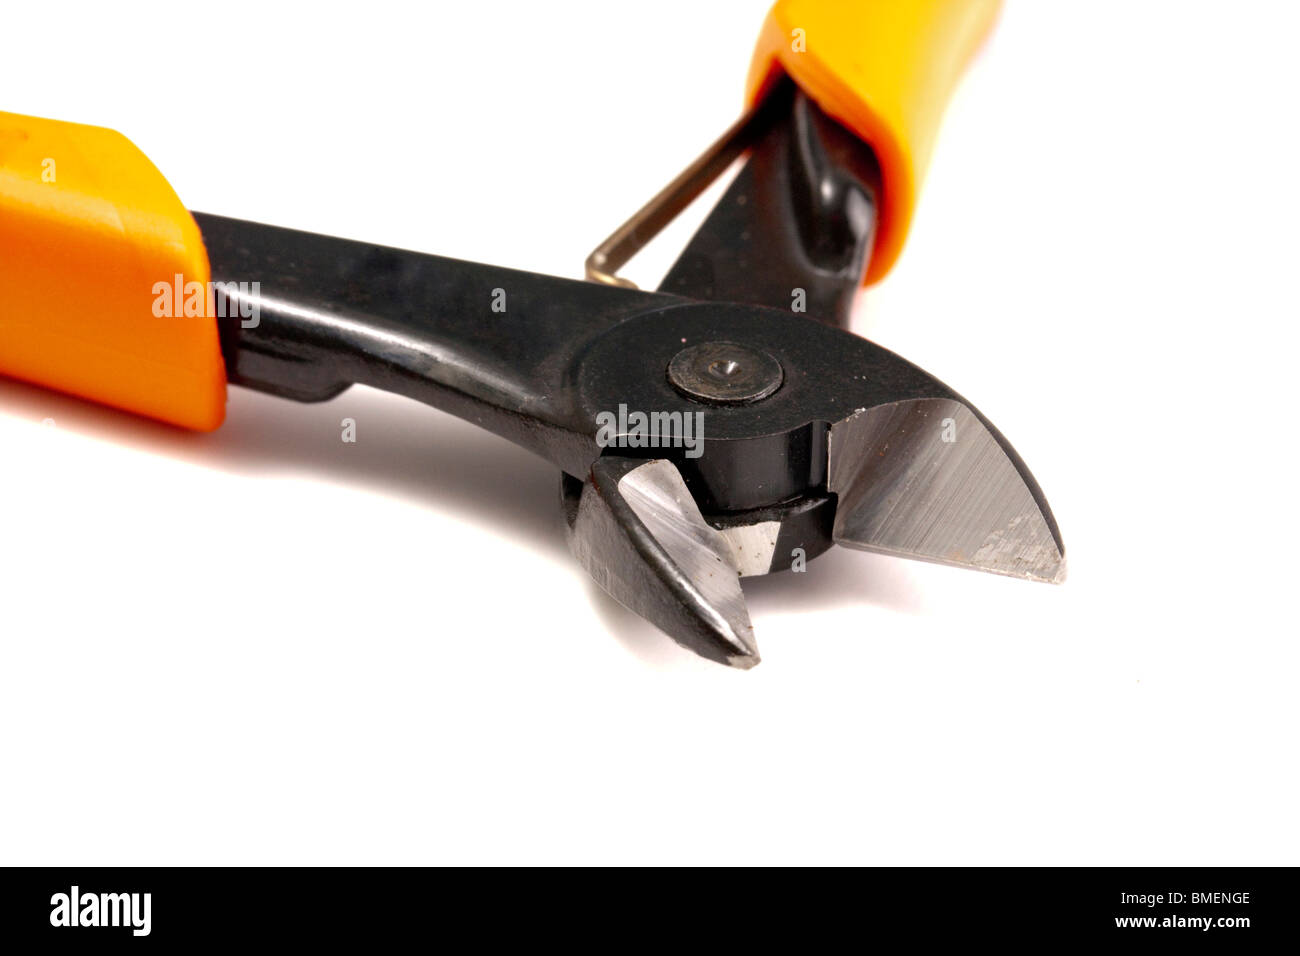 Side Cutters on white background Stock Photo